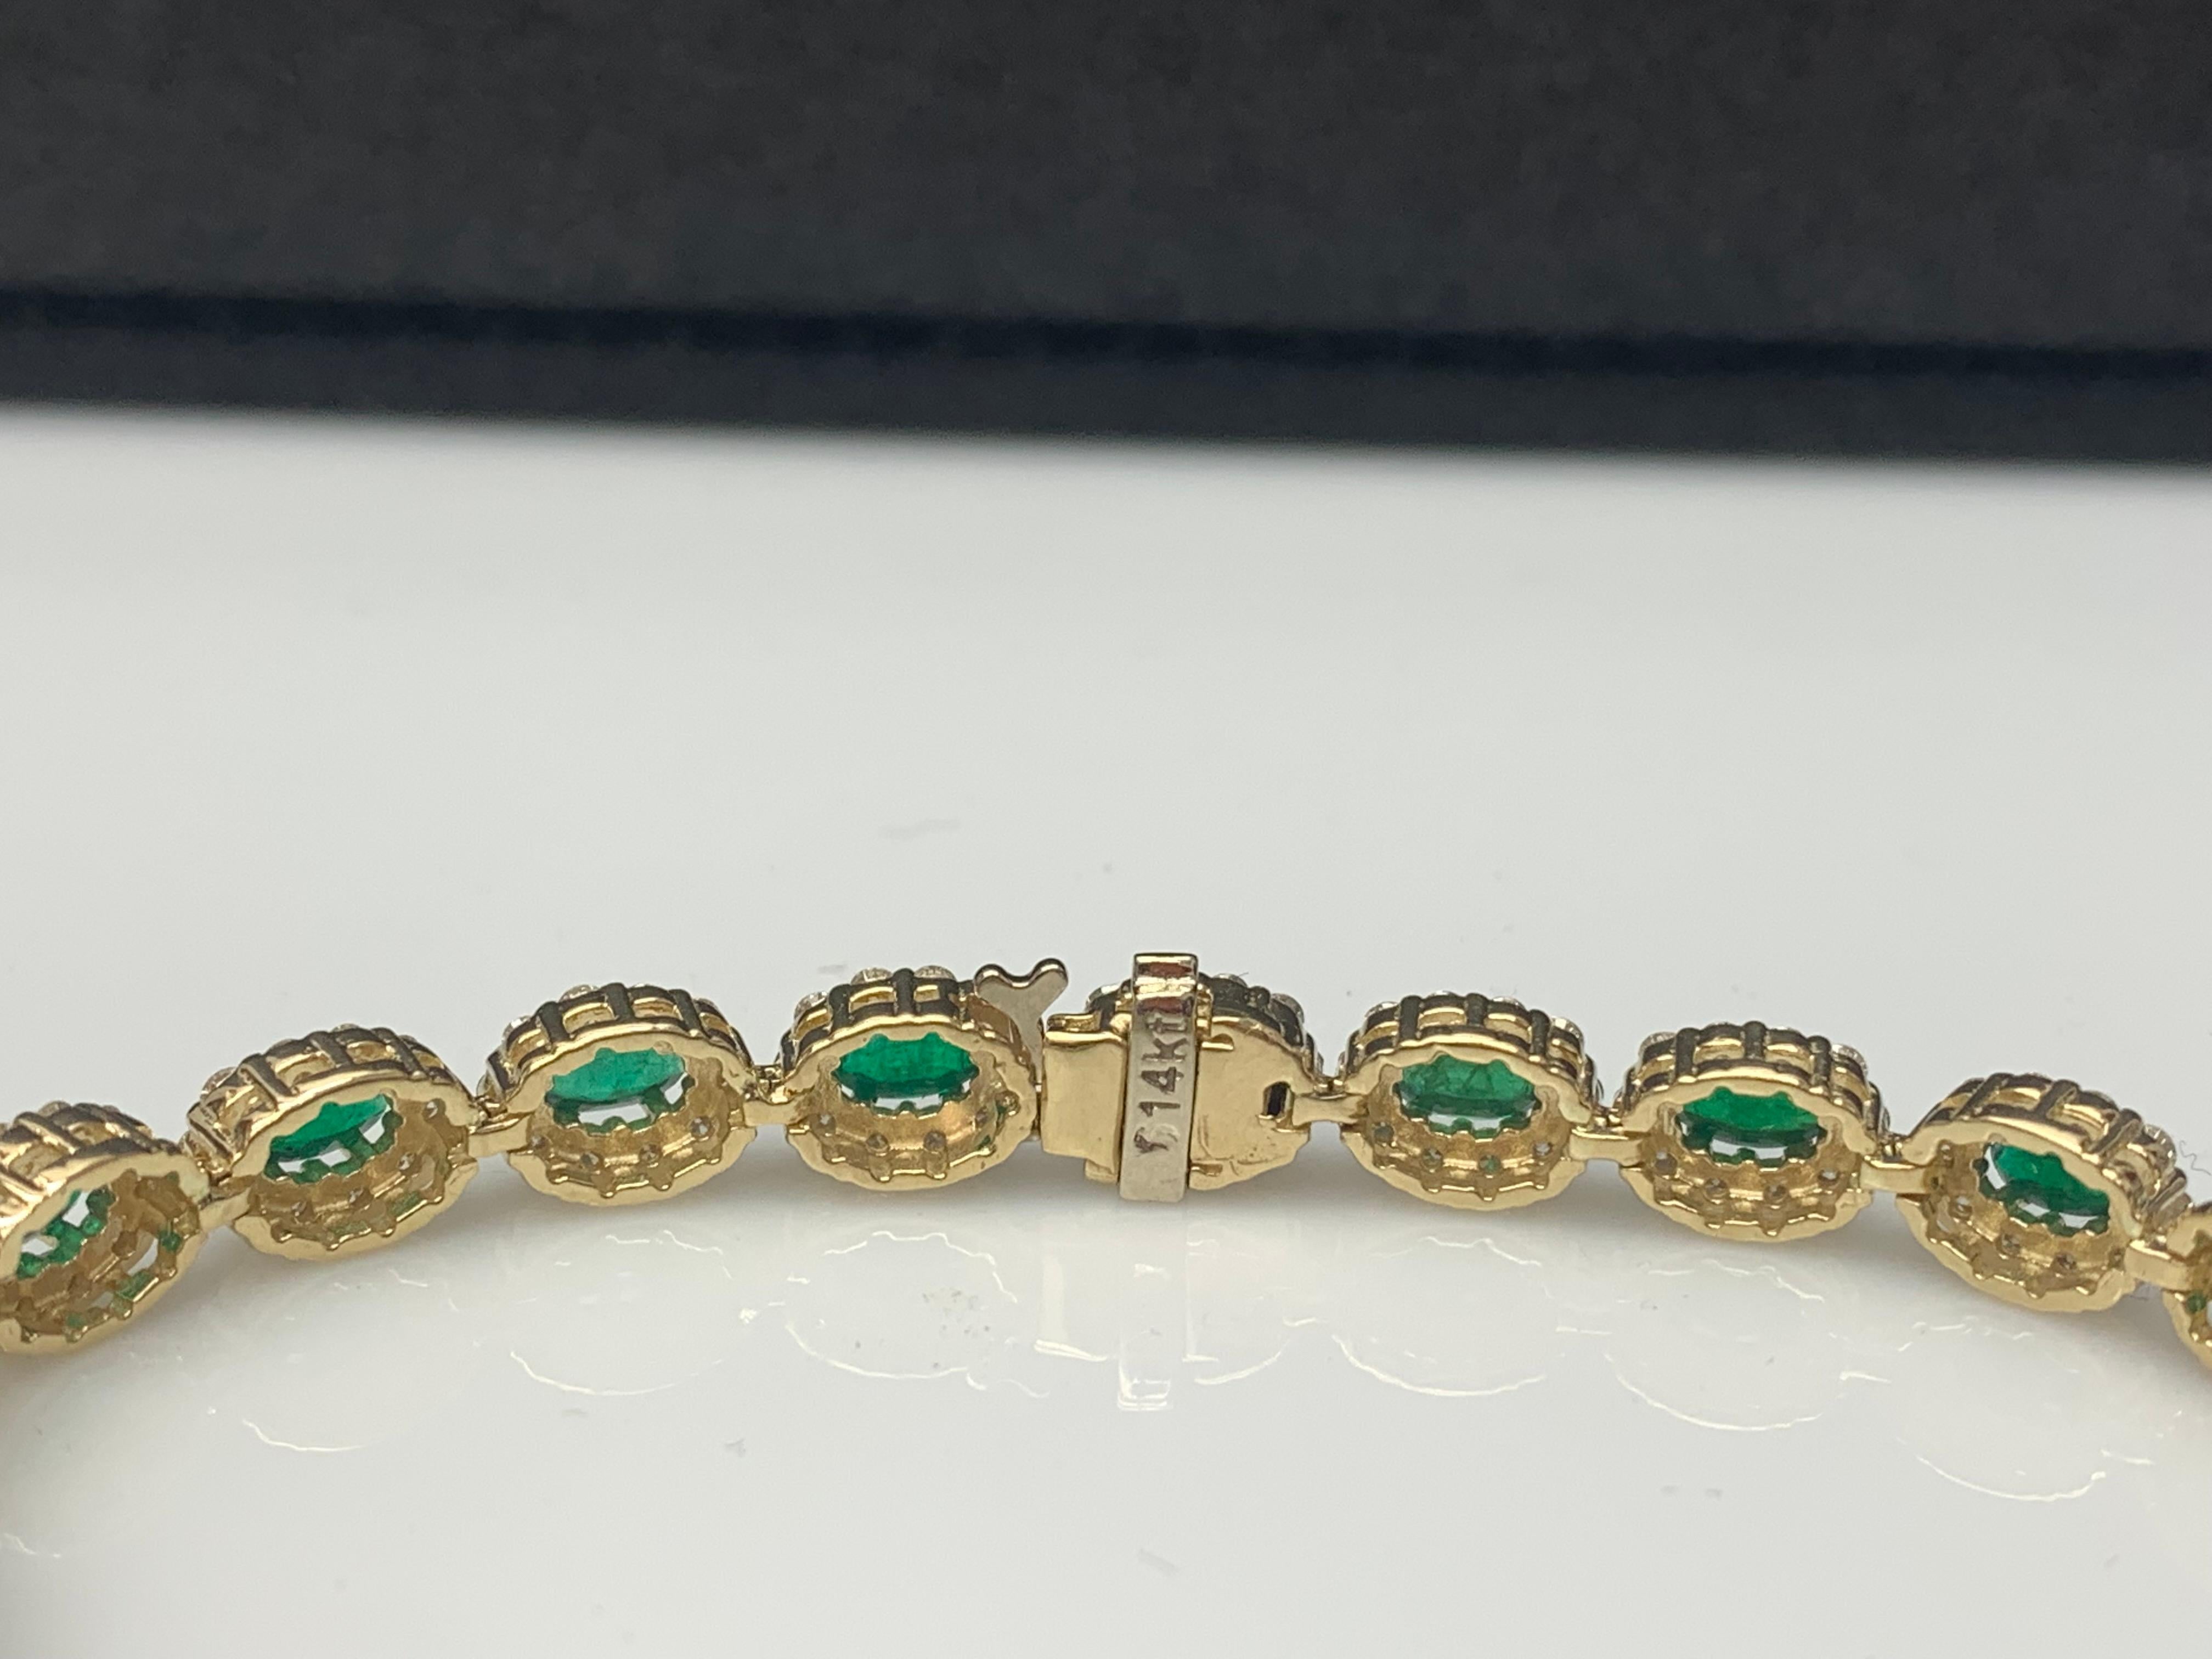 4.69 Carat Oval Cut Emerald and Diamond Halo Bracelet in 14K Yellow Gold For Sale 1